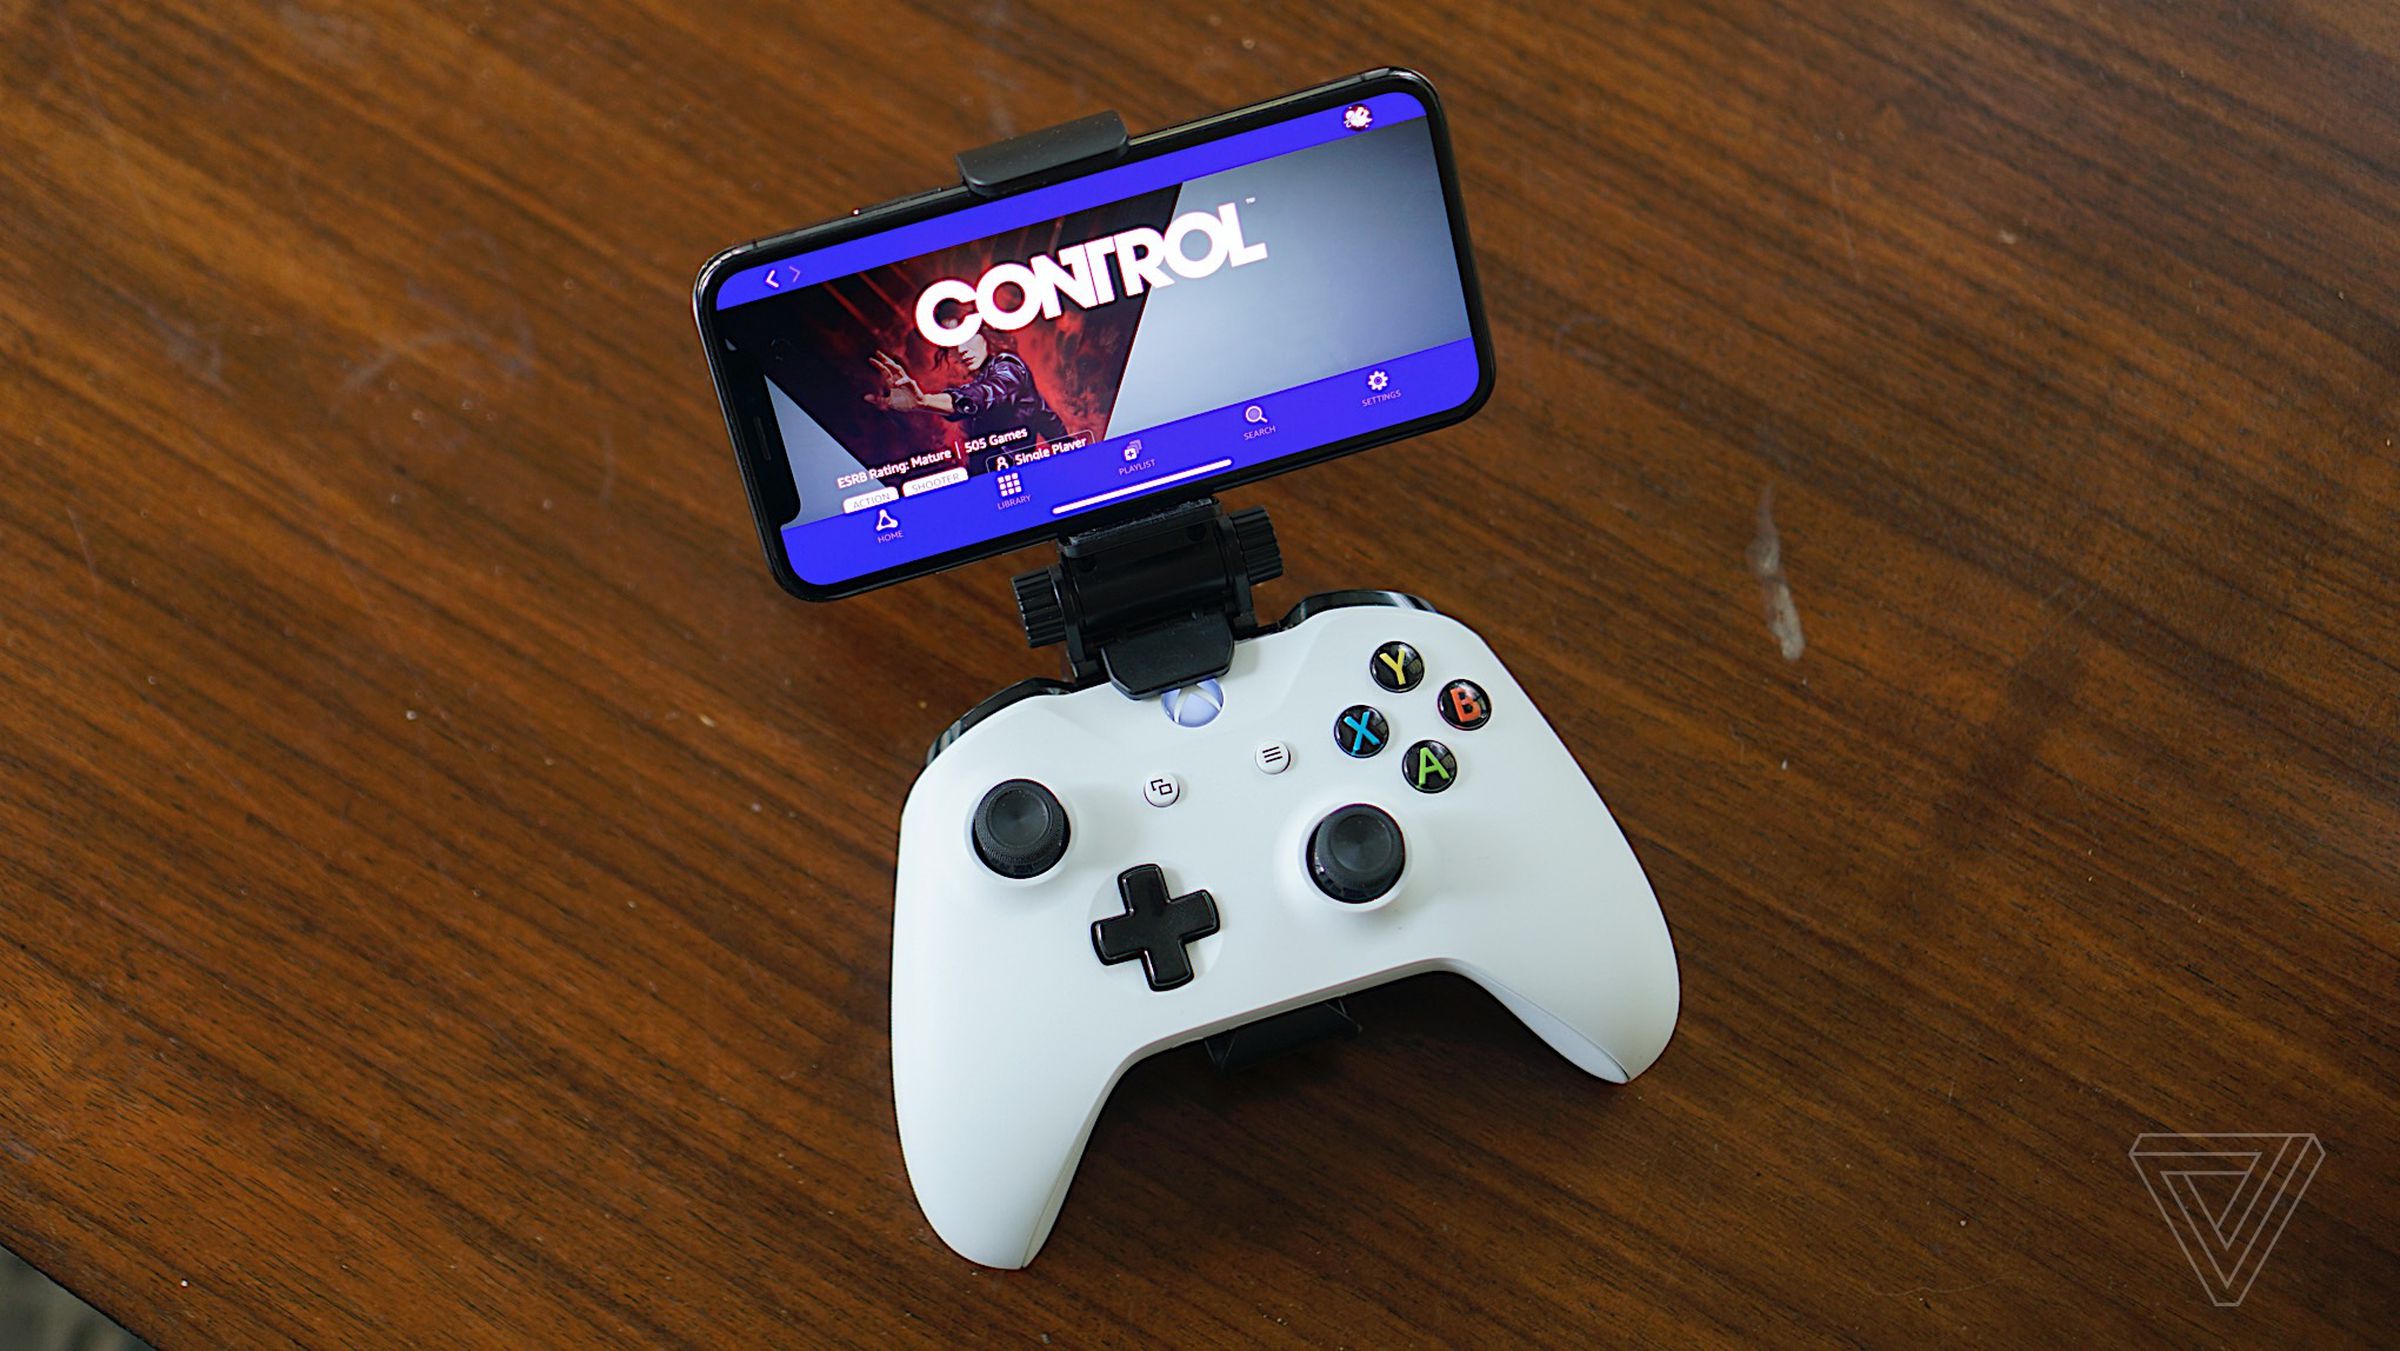 Luna works on iOS devices with a variety of Bluetooth controllers.